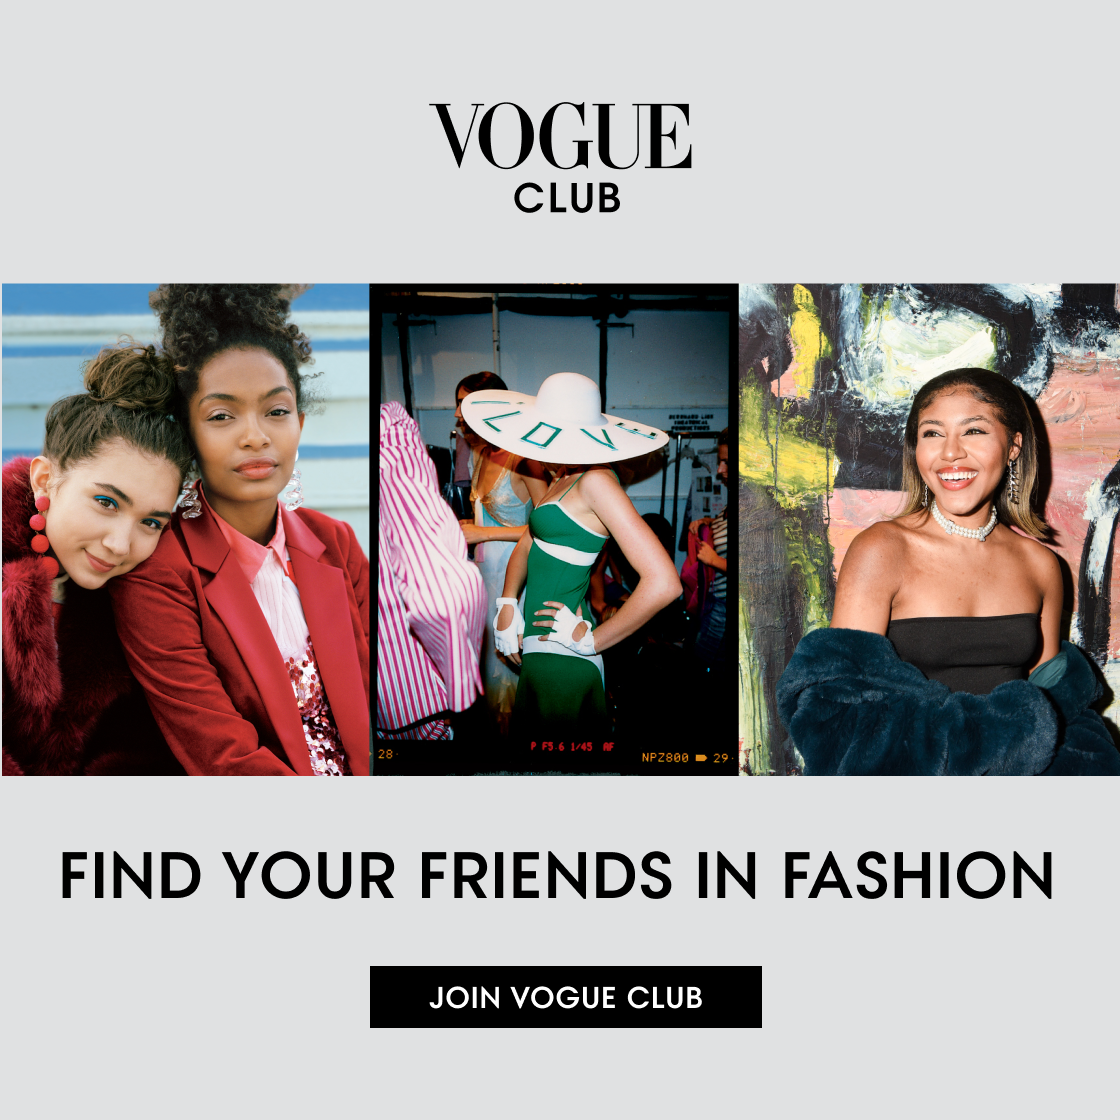 Join Vogue Club